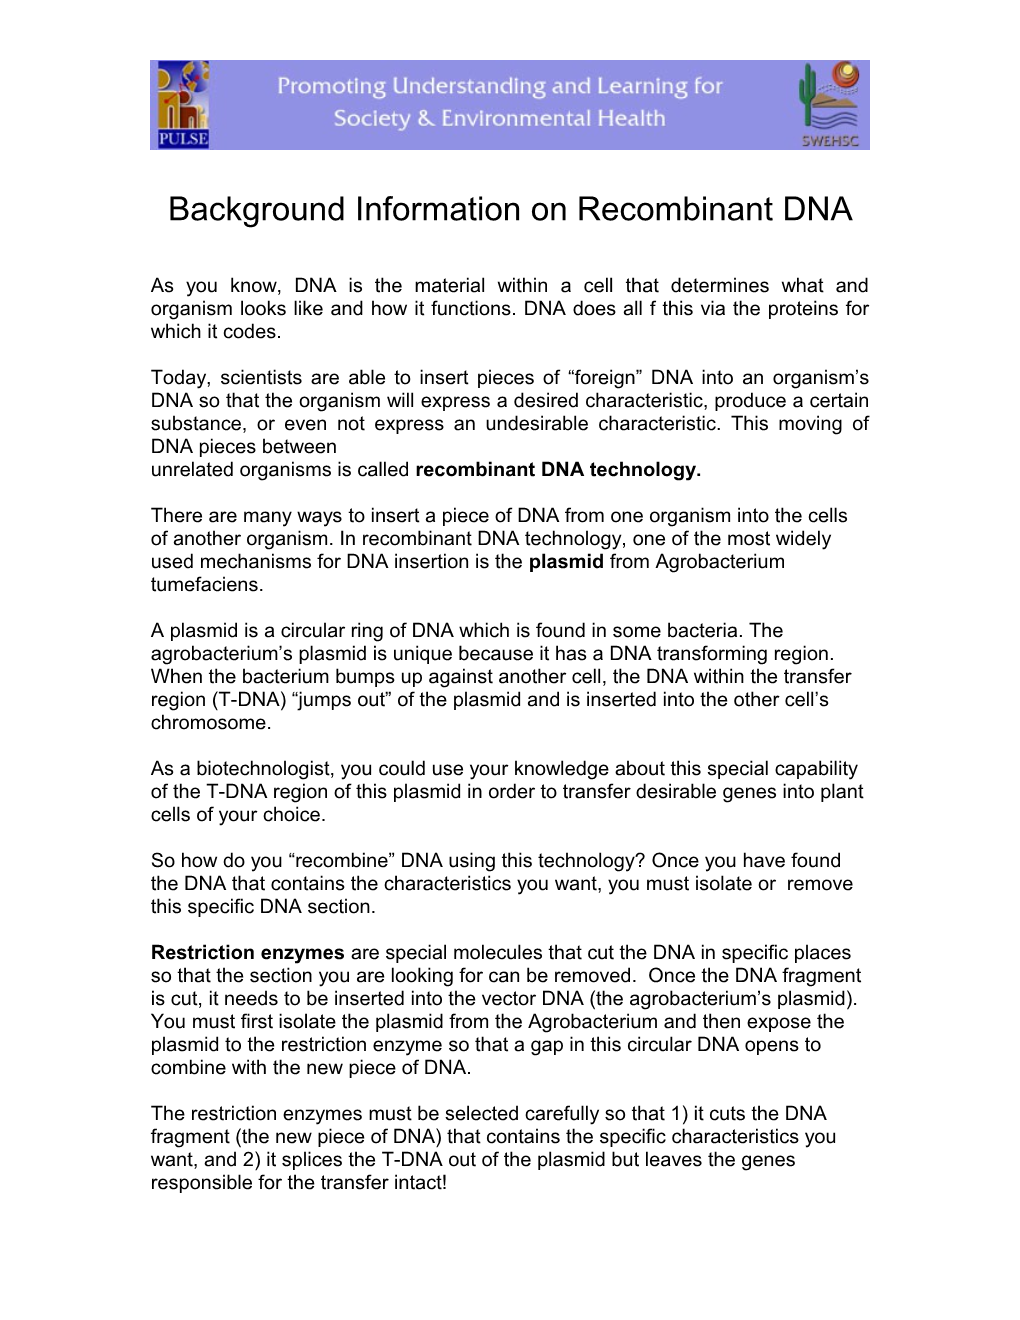 Background Information on Recombinant DNA